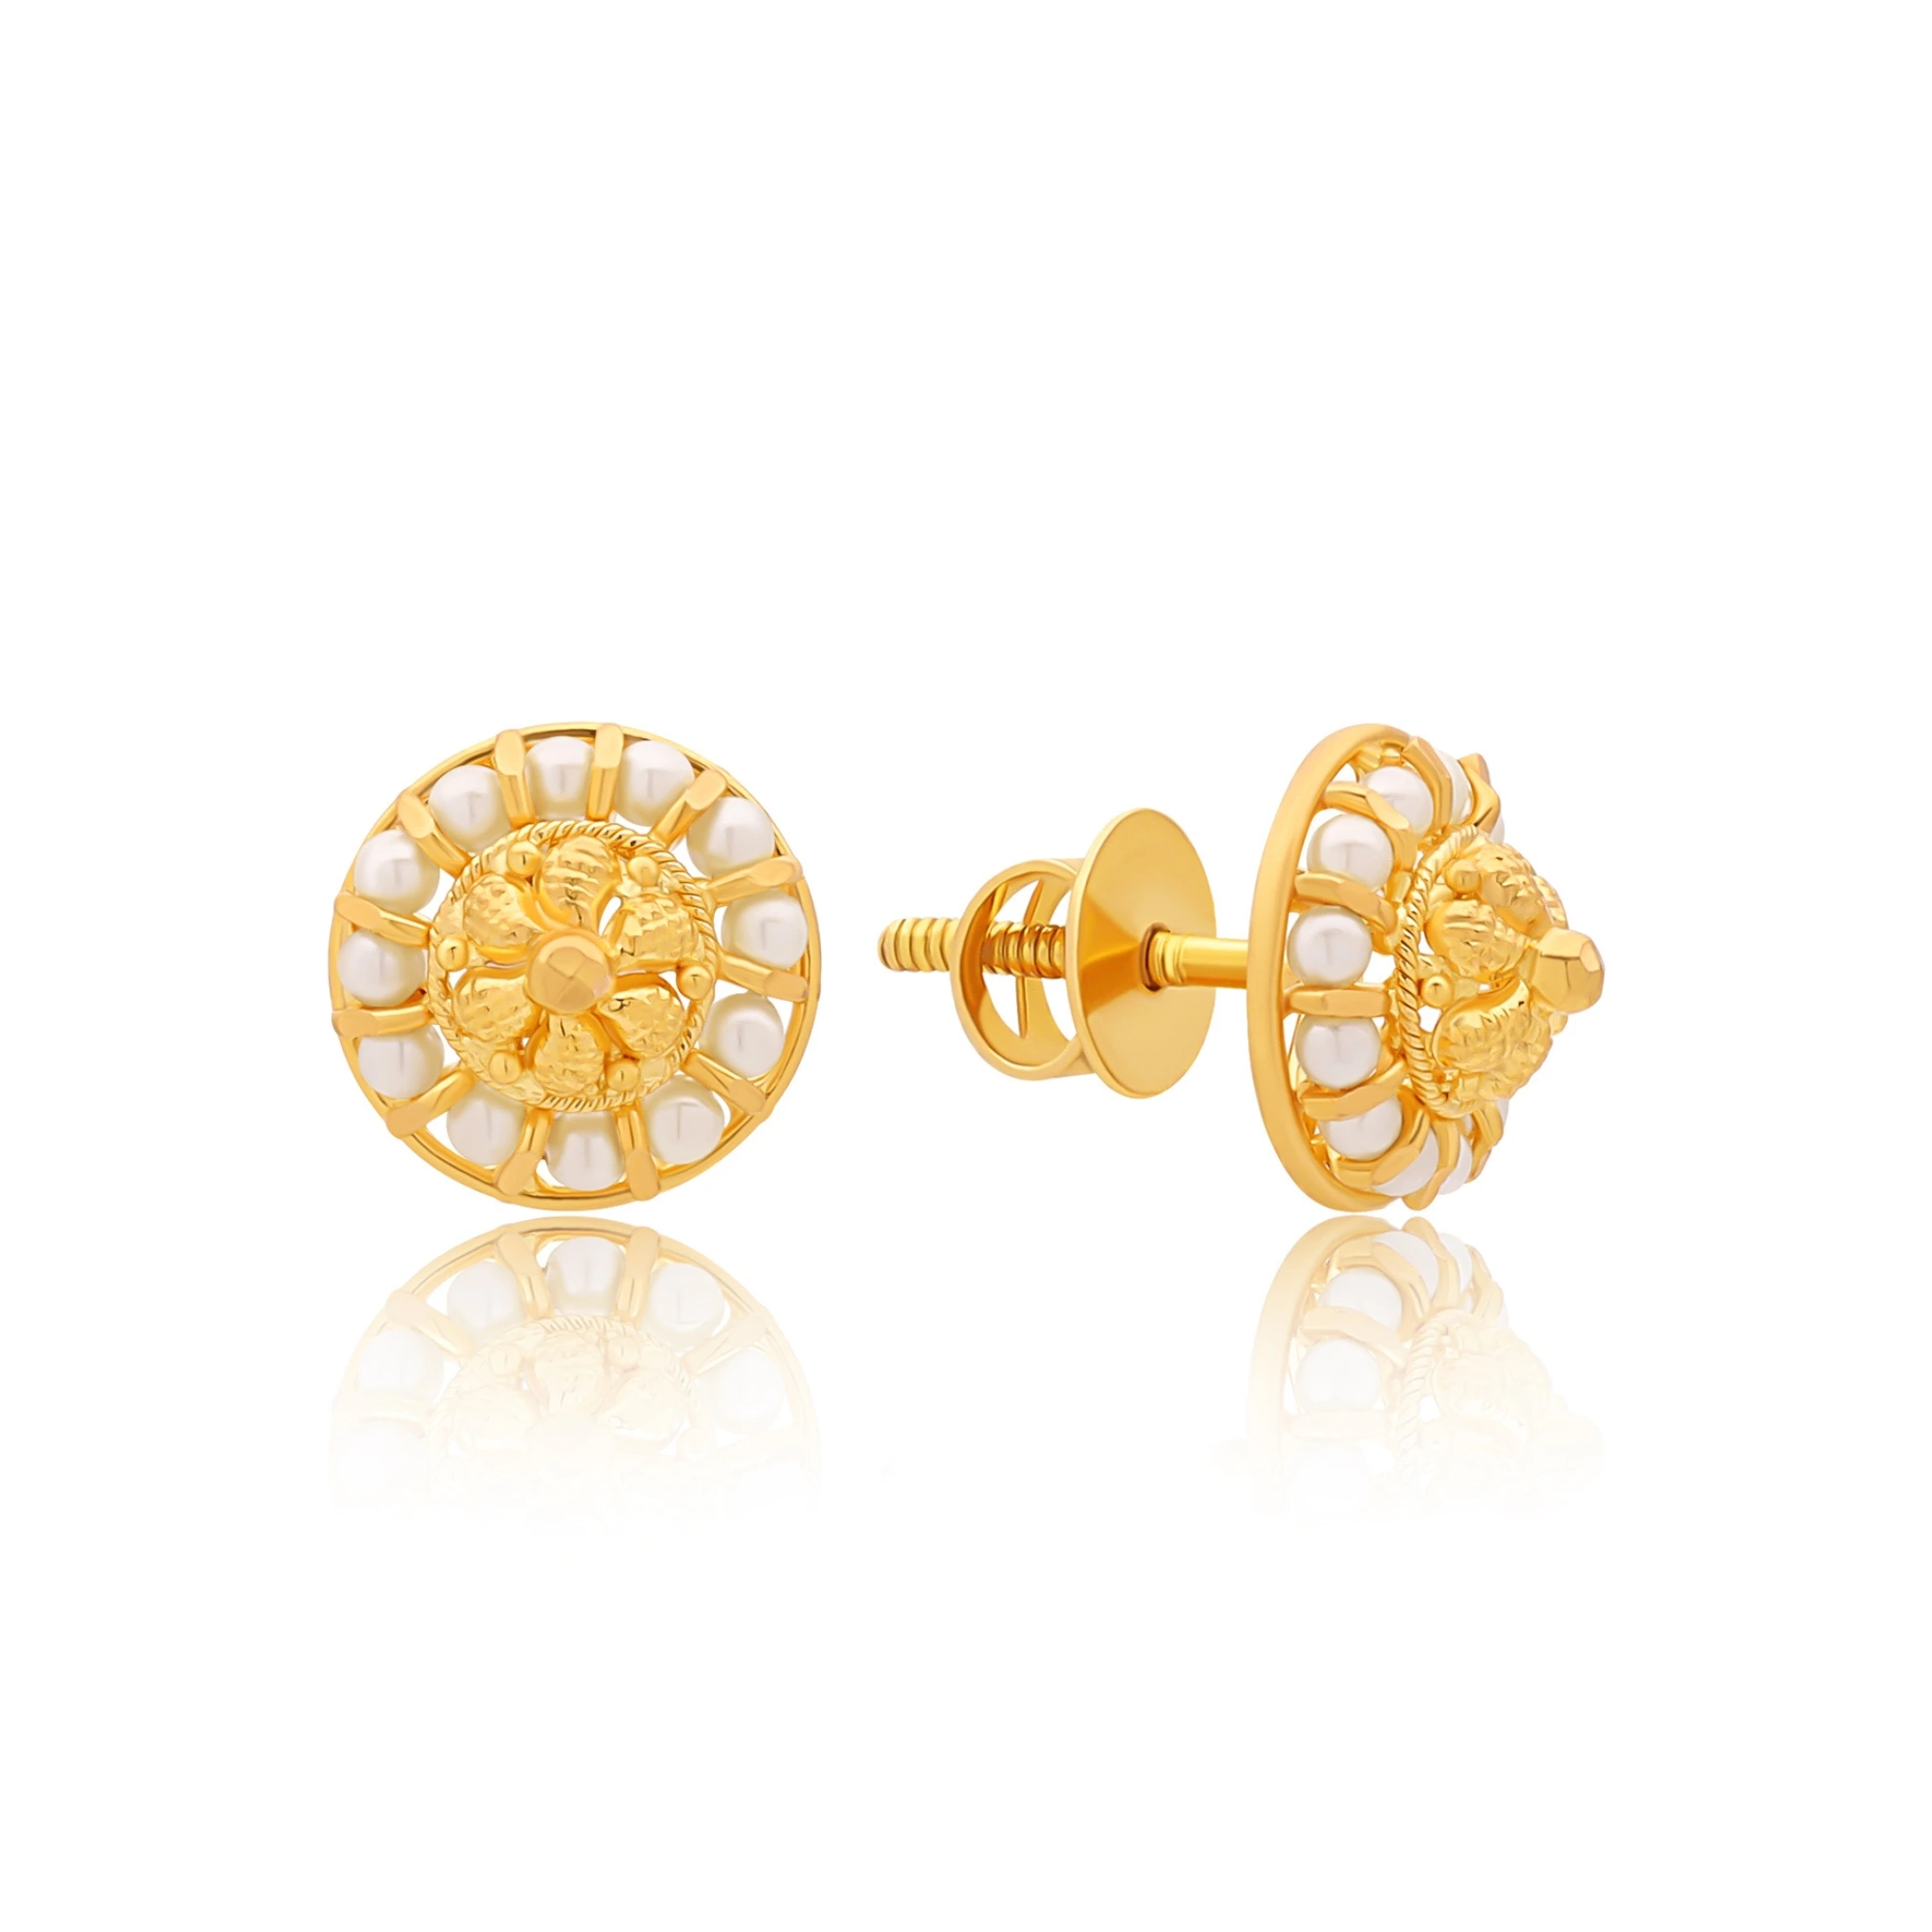 Ethical Fashion Gold Earrings | SEHGAL GOLD ORNAMENTS PVT. LTD.